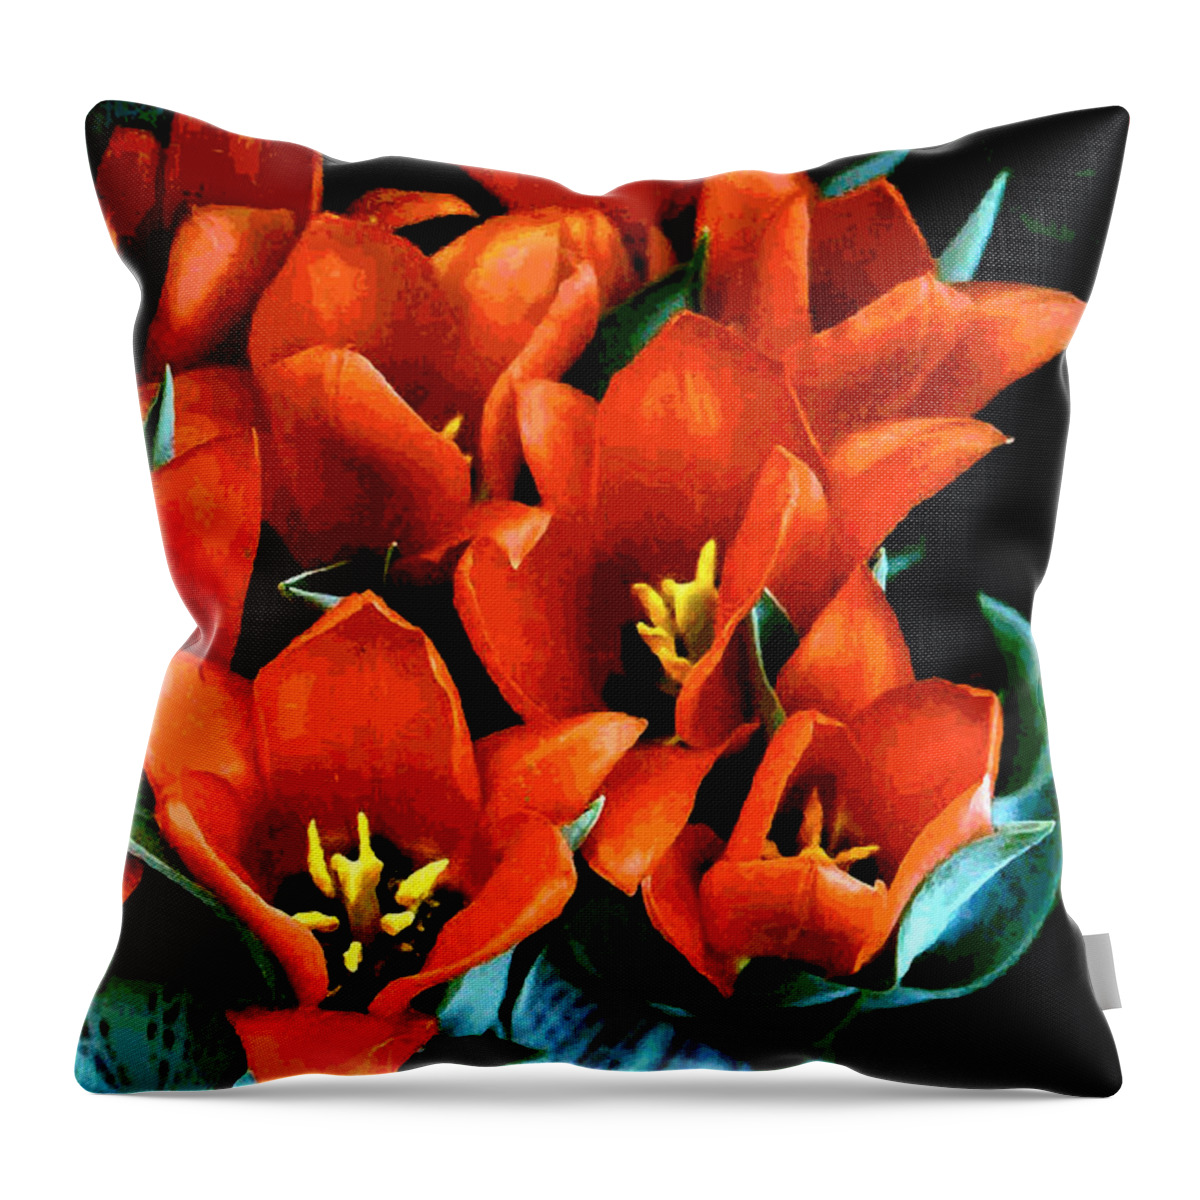 Tulips Throw Pillow featuring the photograph Red Ridinghood Tulips by Janis Senungetuk